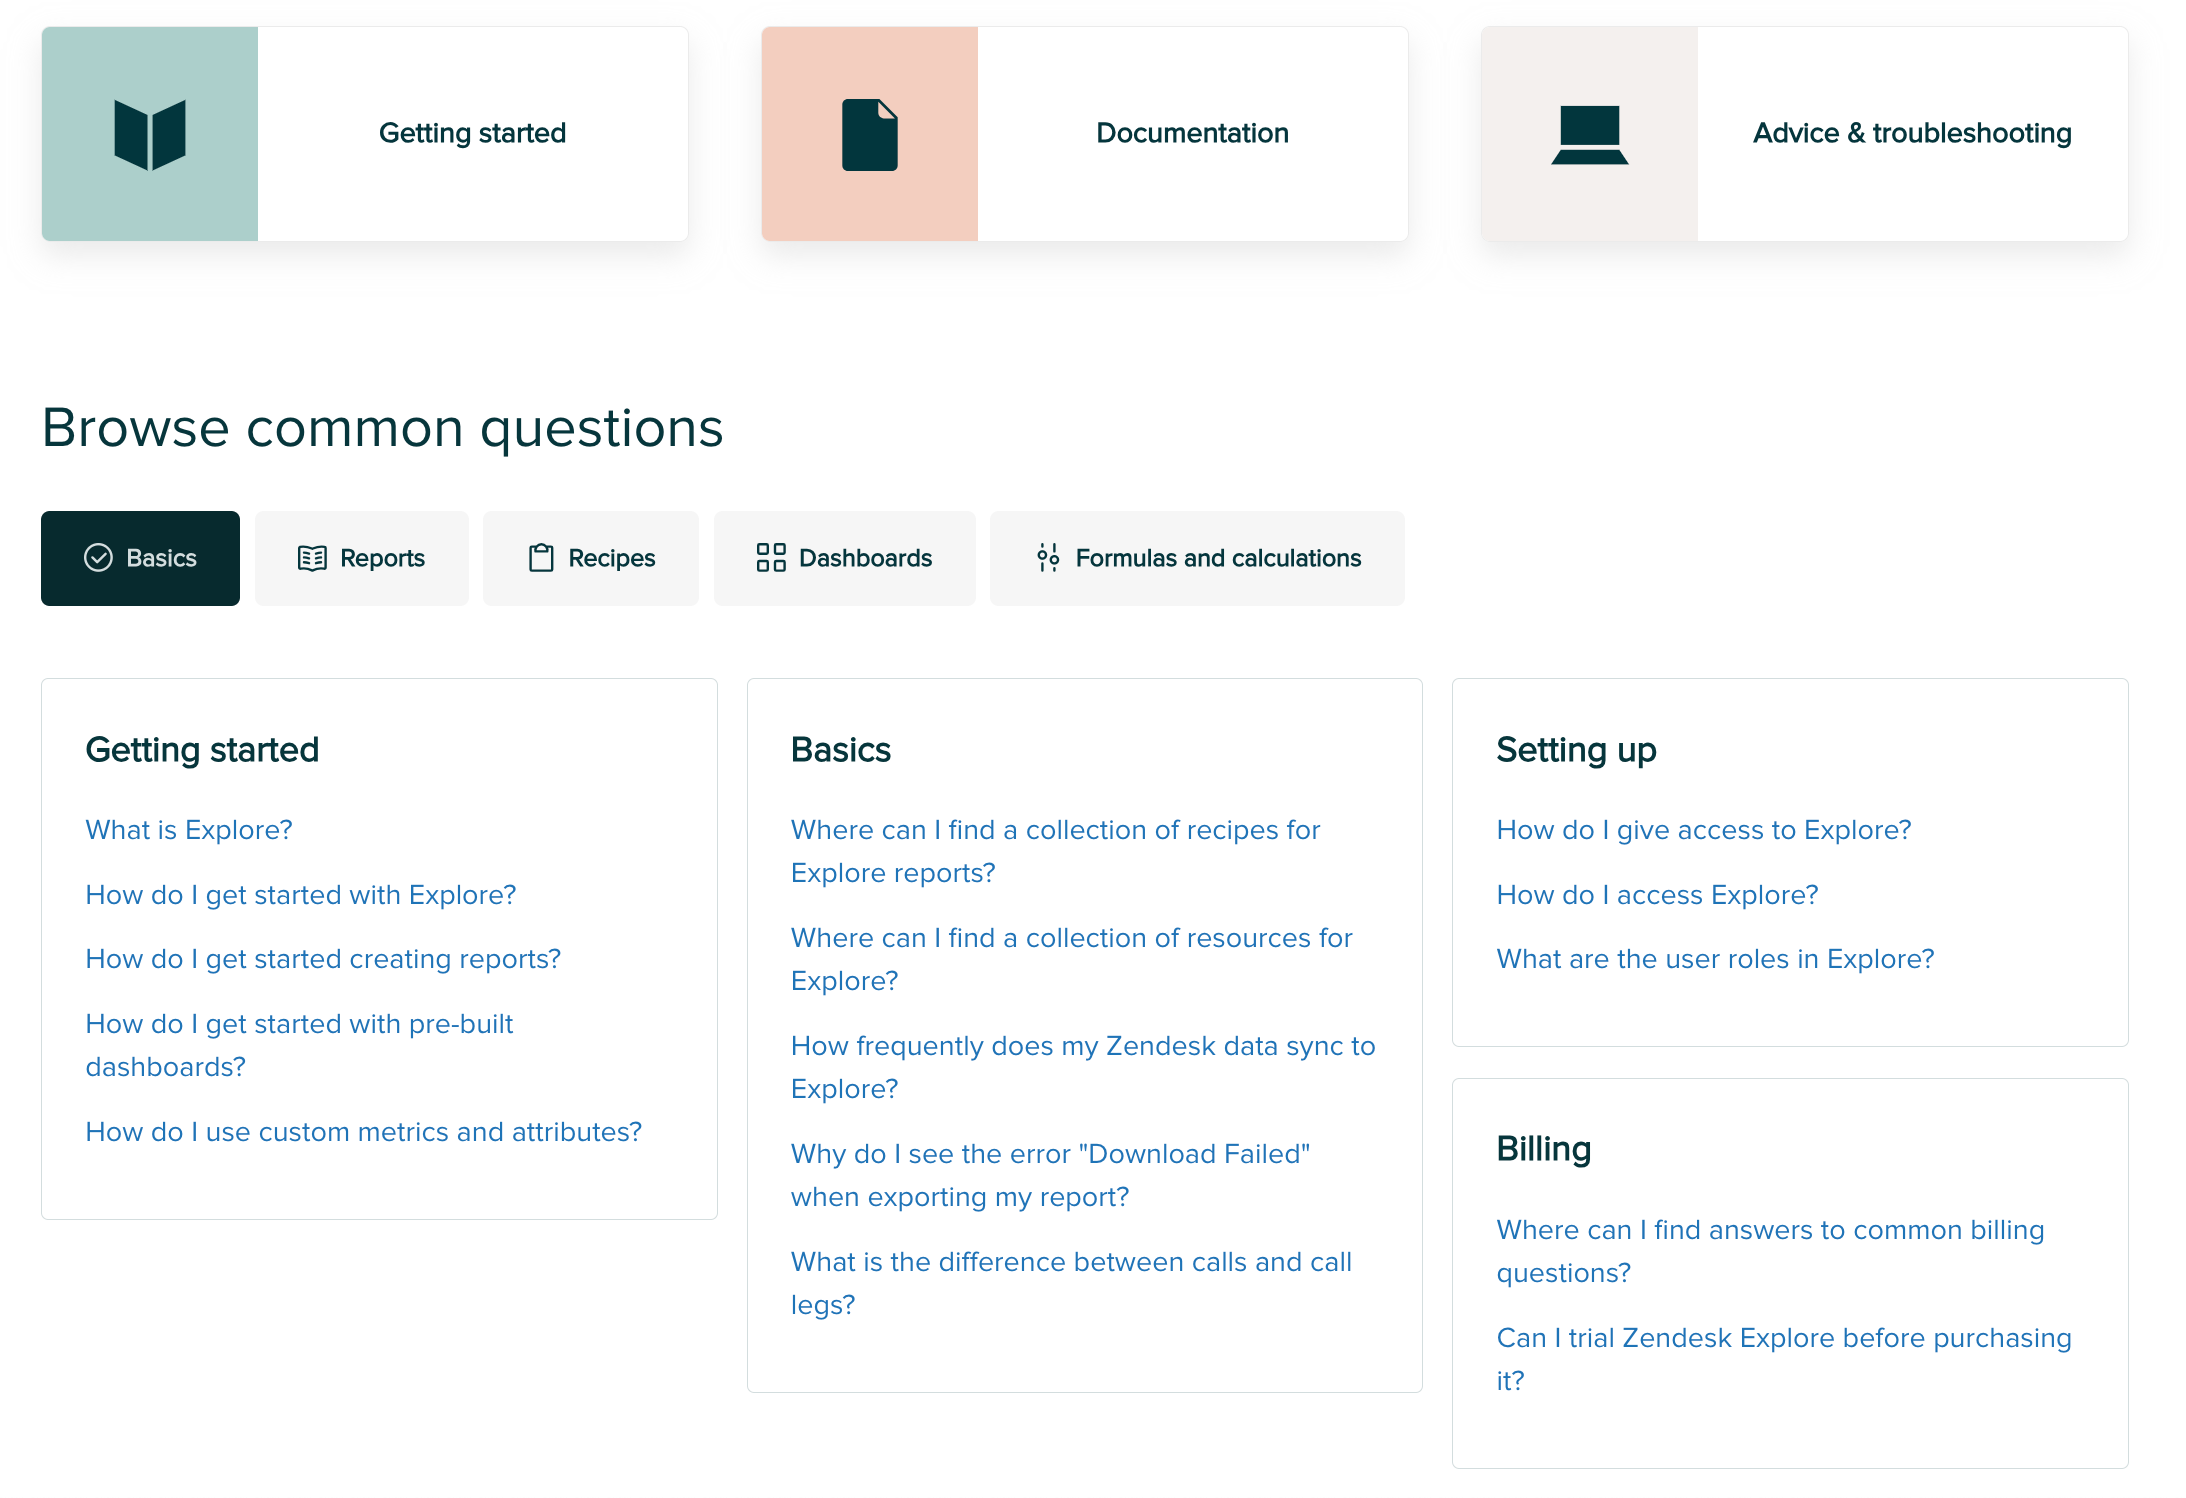 Browse sections and common questions in Zendesk help.png